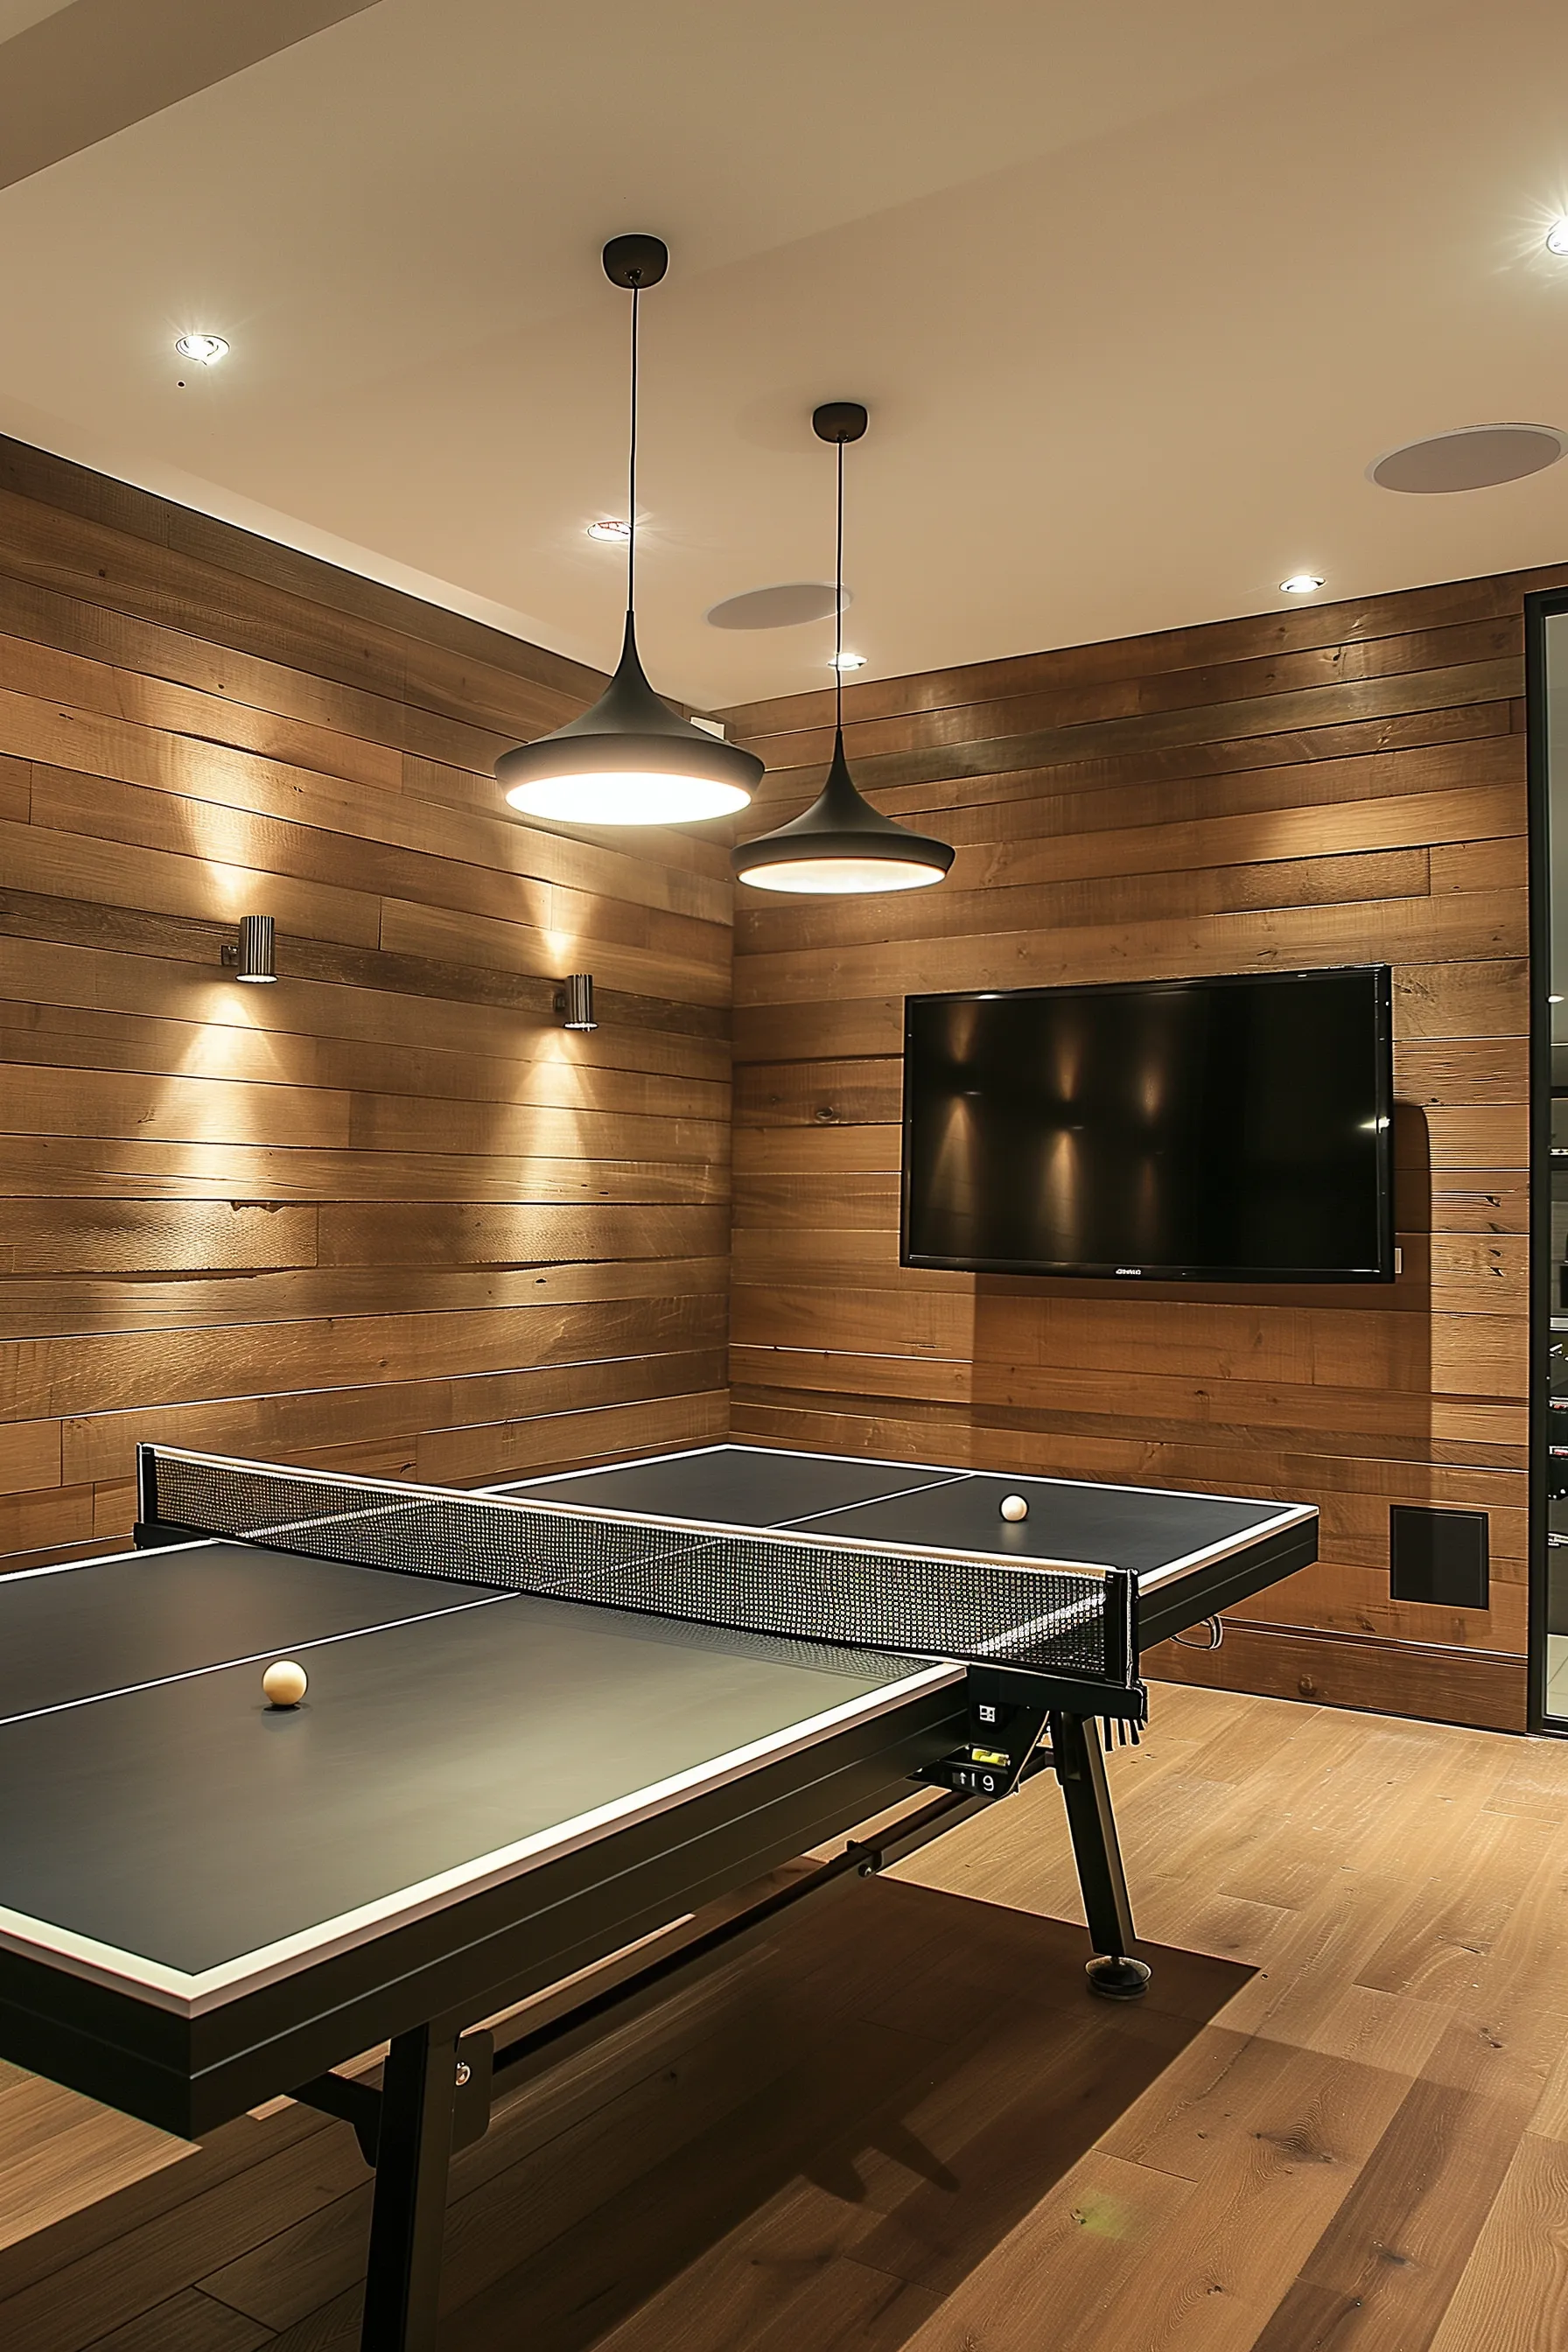 table tennis game room